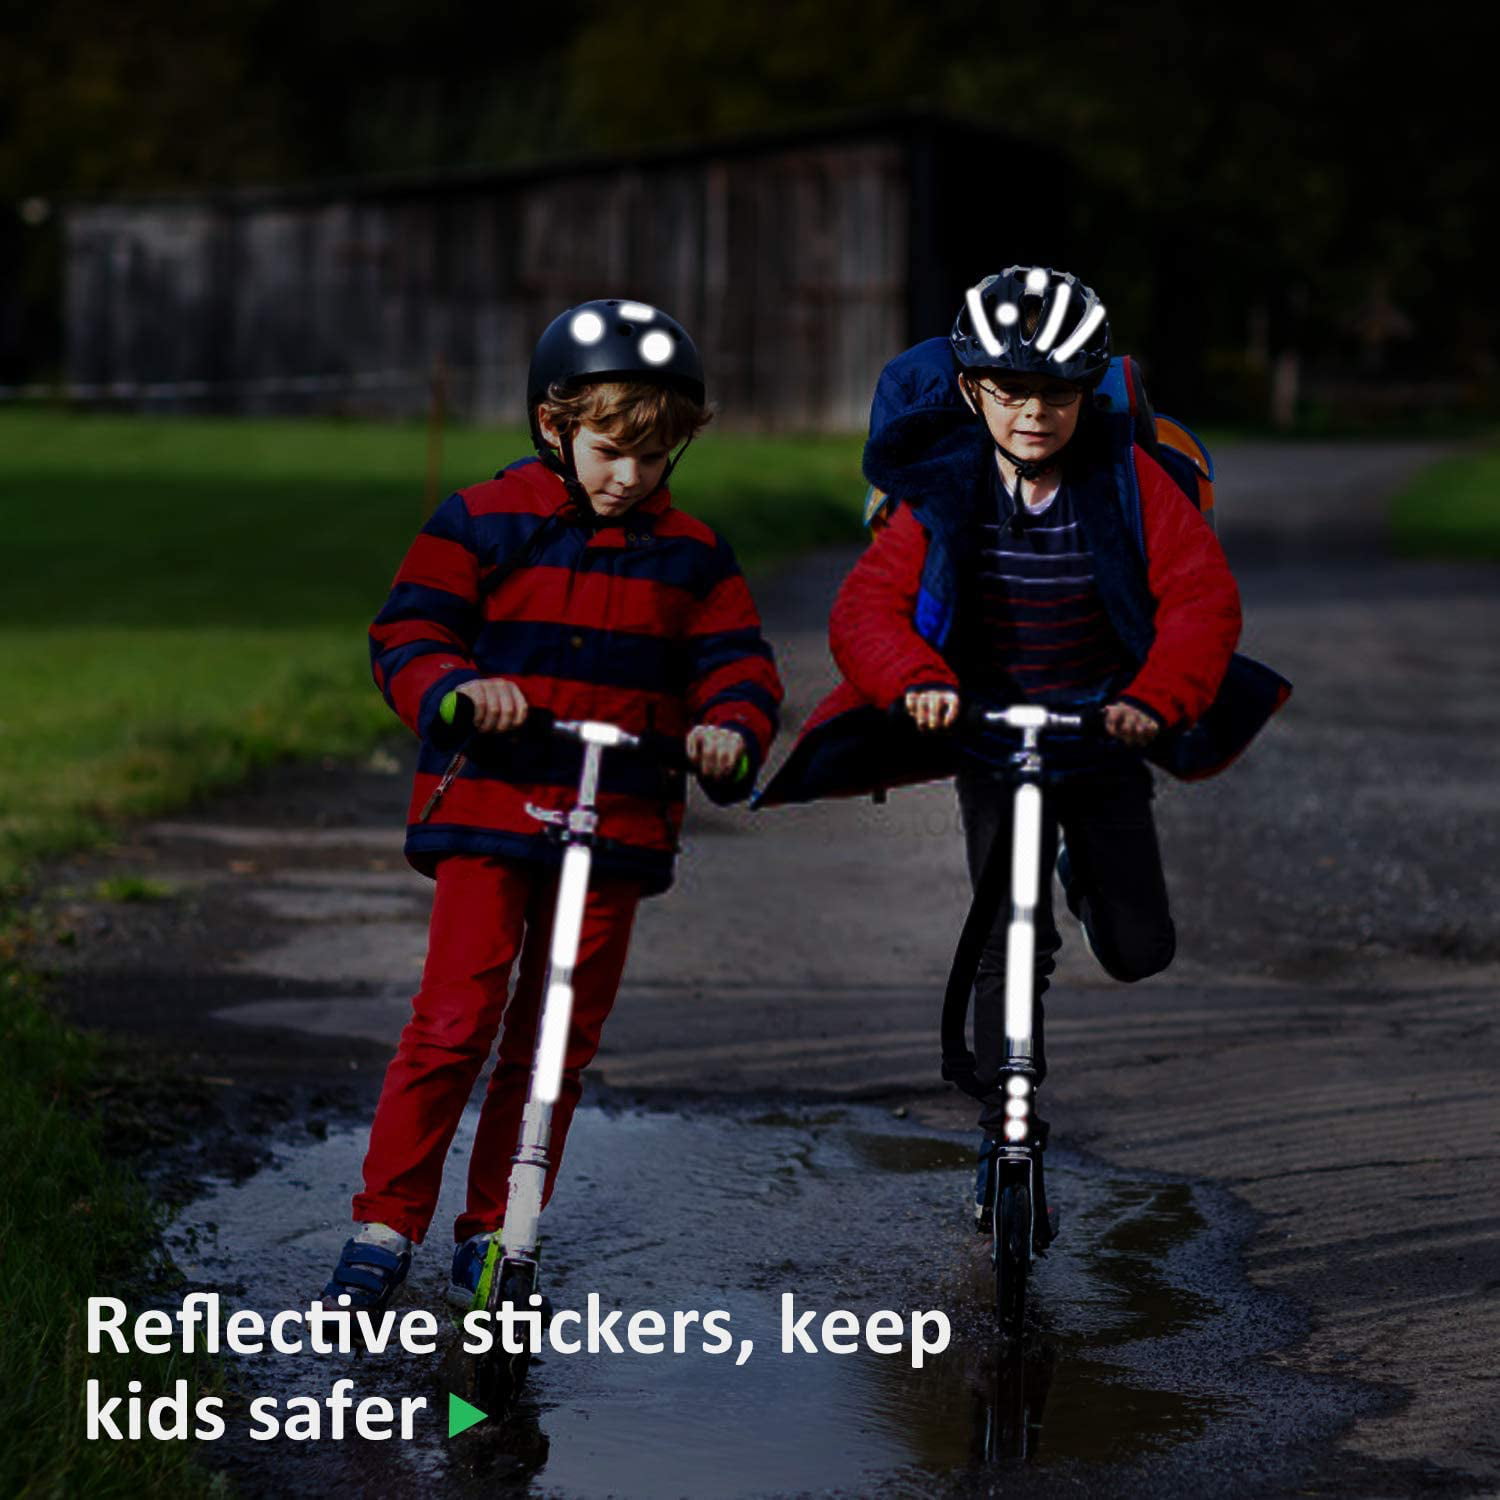 self-Adhesive and Highly Reflective Weatherproof Sticker. Bicycles Helmets with Stickers 21 Pieces high Quality reflectors Stickers HiPerformance Reflective Film Set for Safety Marking of prams